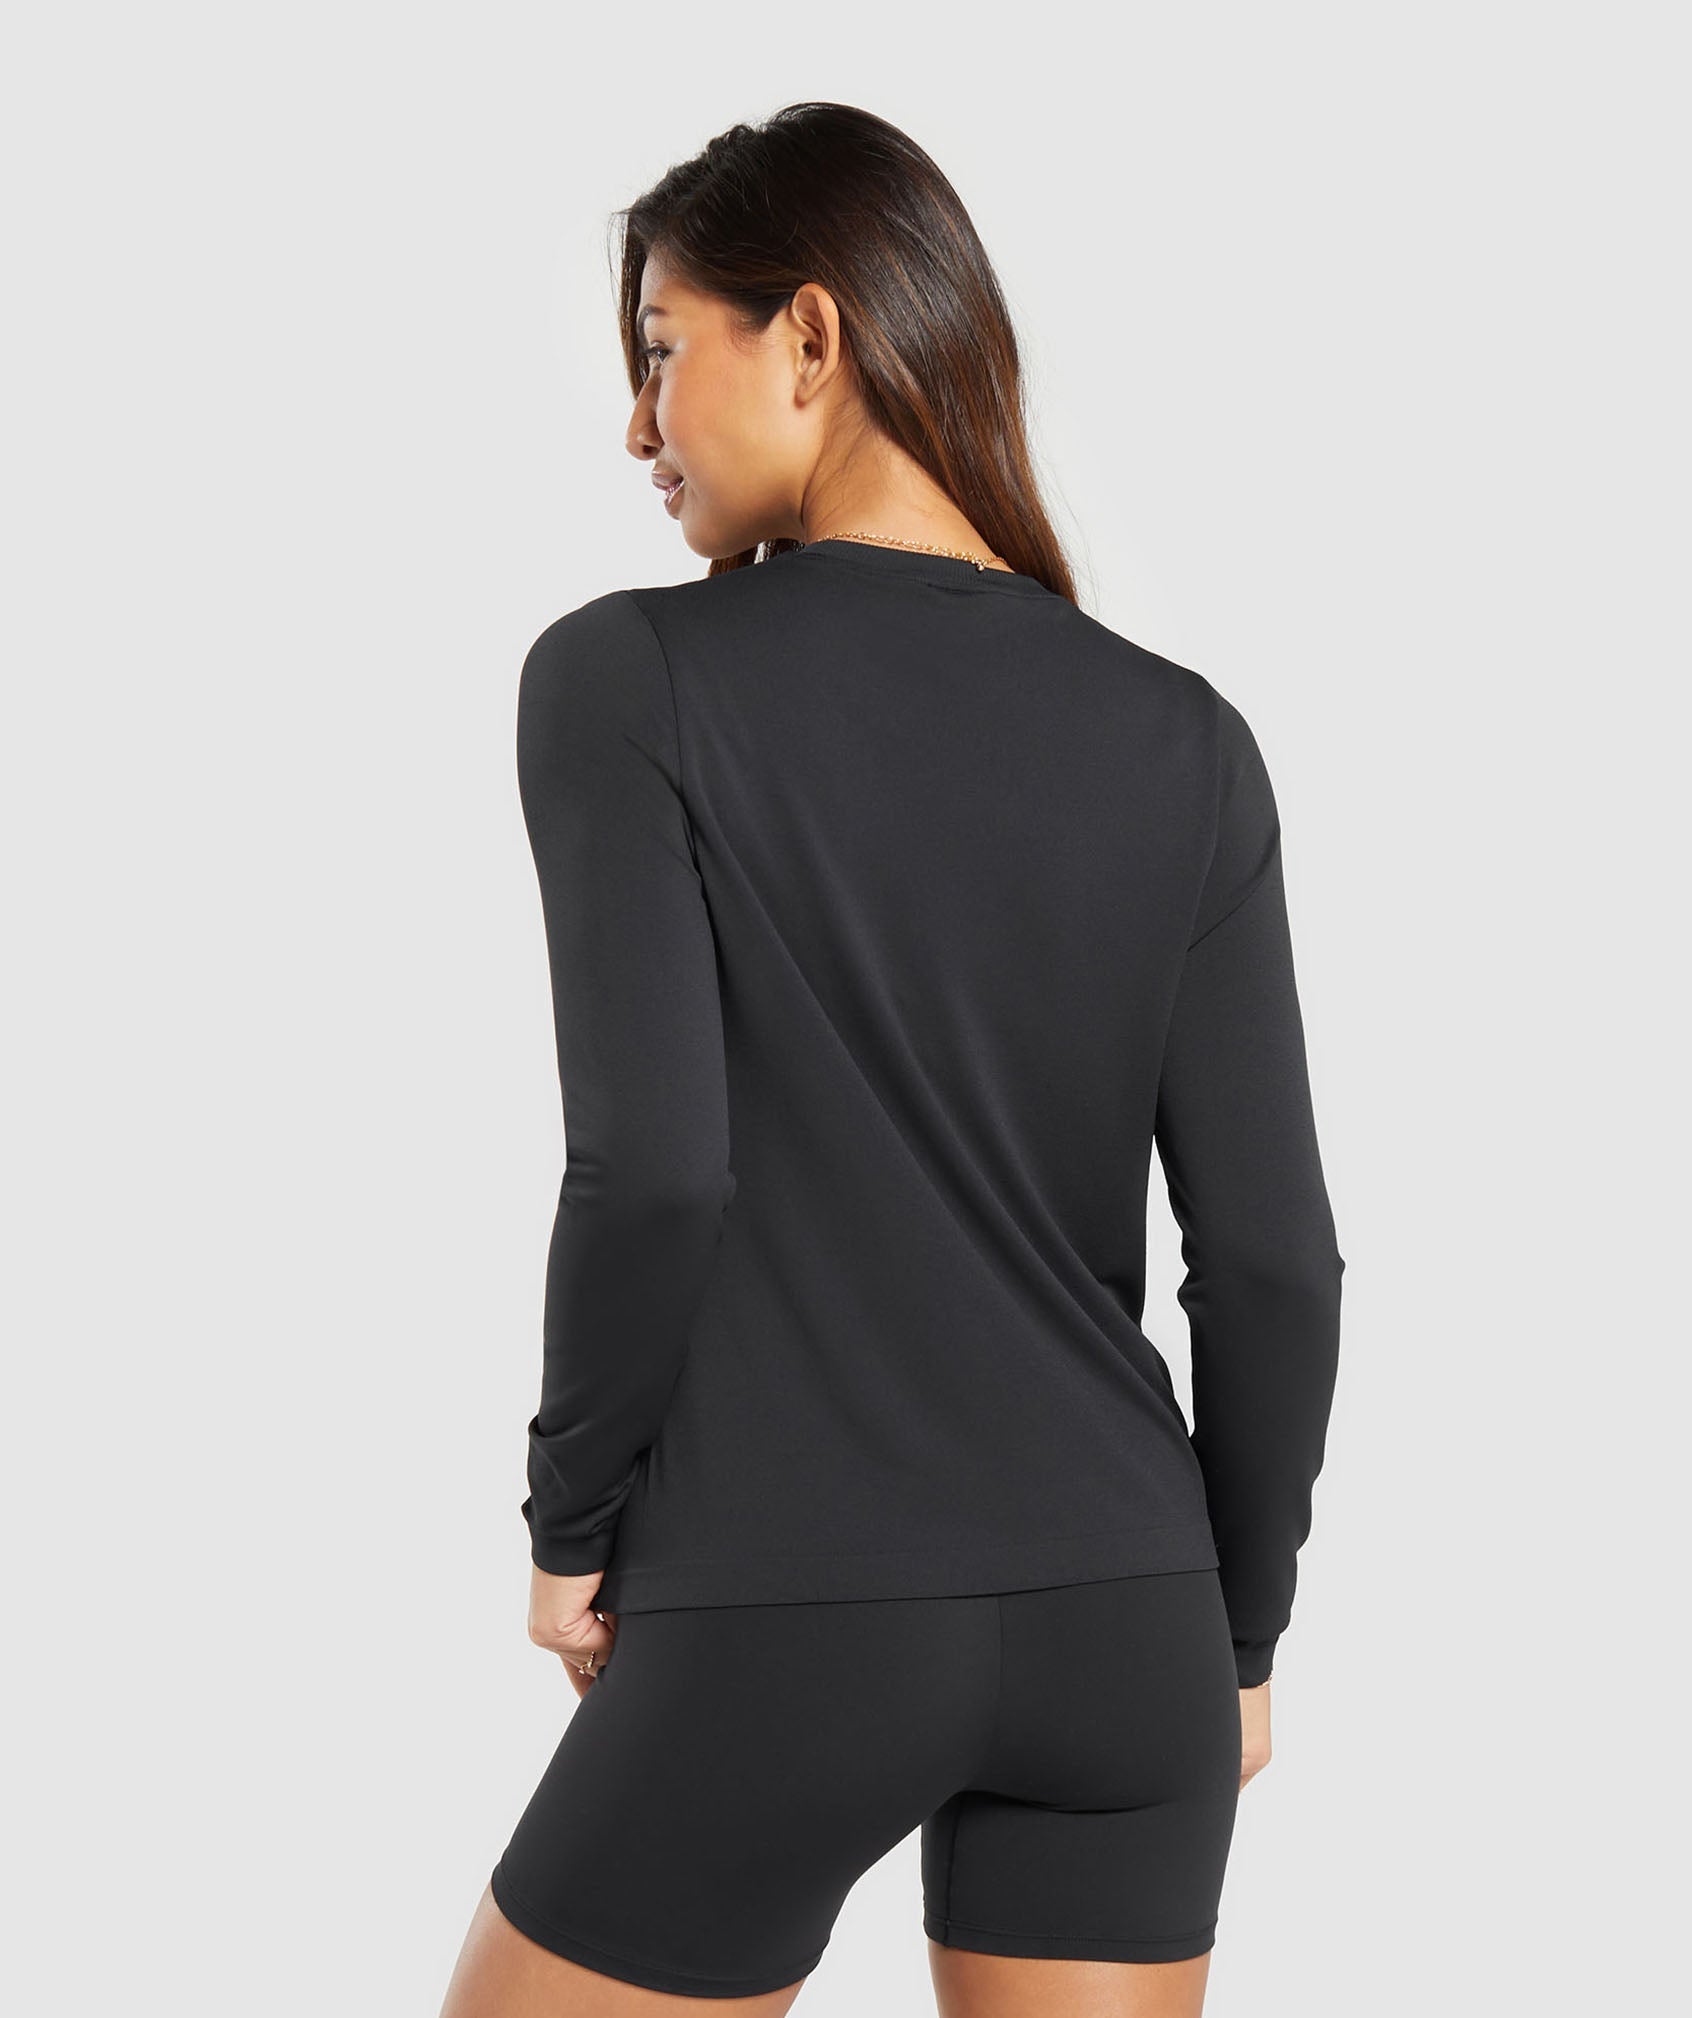 Everyday Seamless Long Sleeve Top in Black - view 2